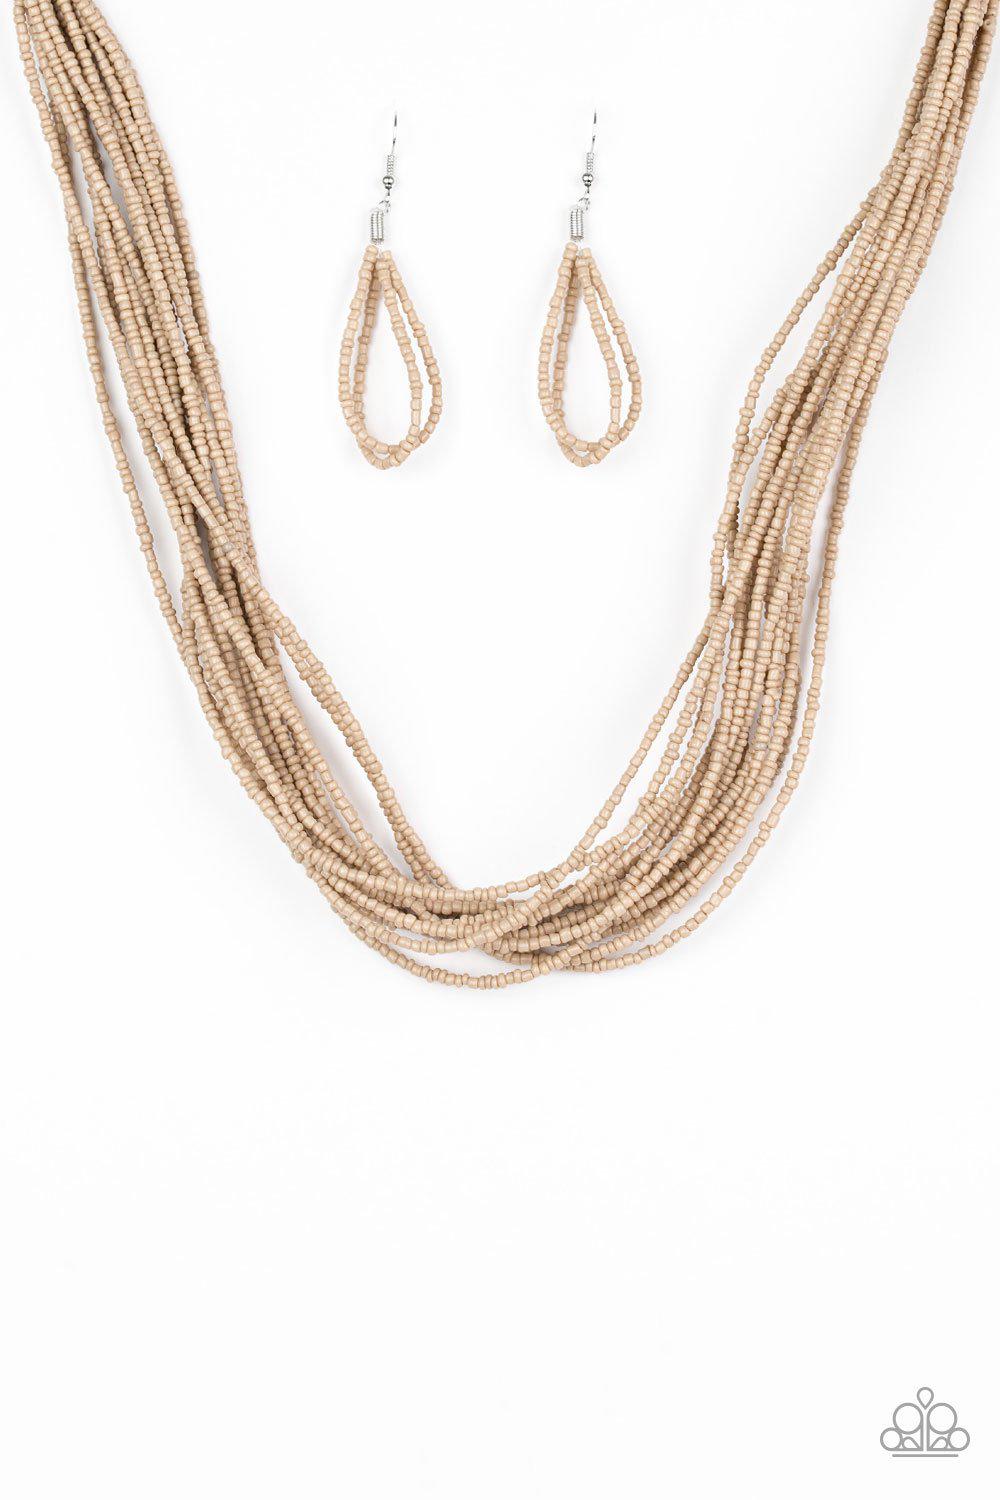 Wide Open Spaces Brown Seed Bead Necklace - Paparazzi Accessories-CarasShop.com - $5 Jewelry by Cara Jewels